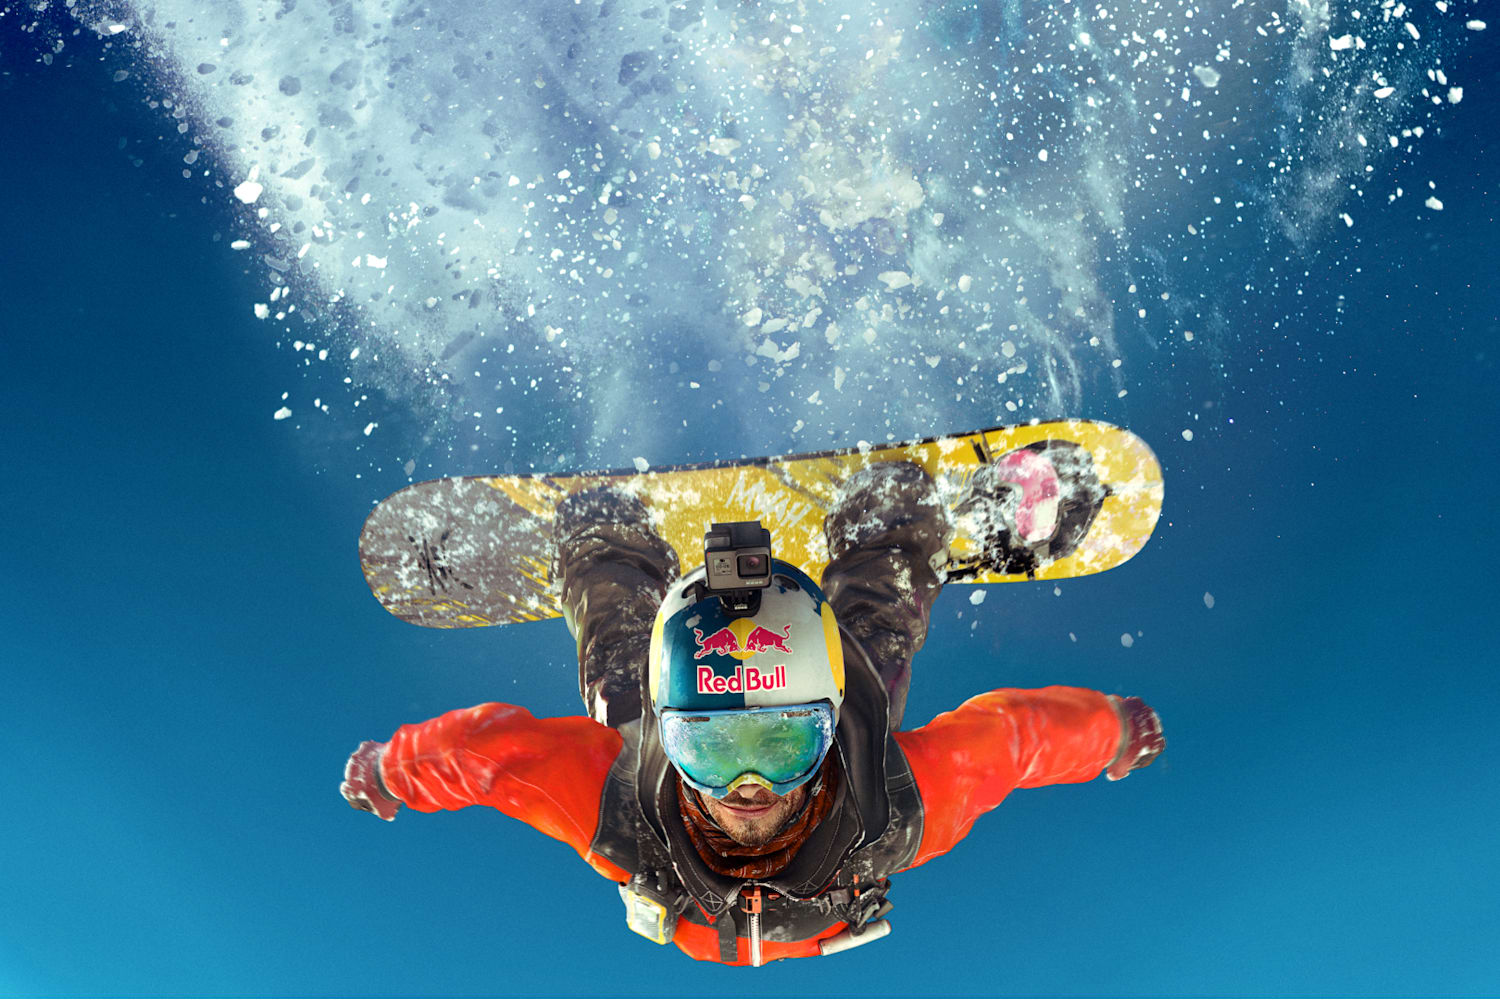 Best snowboarding games of all time 5 you need to play